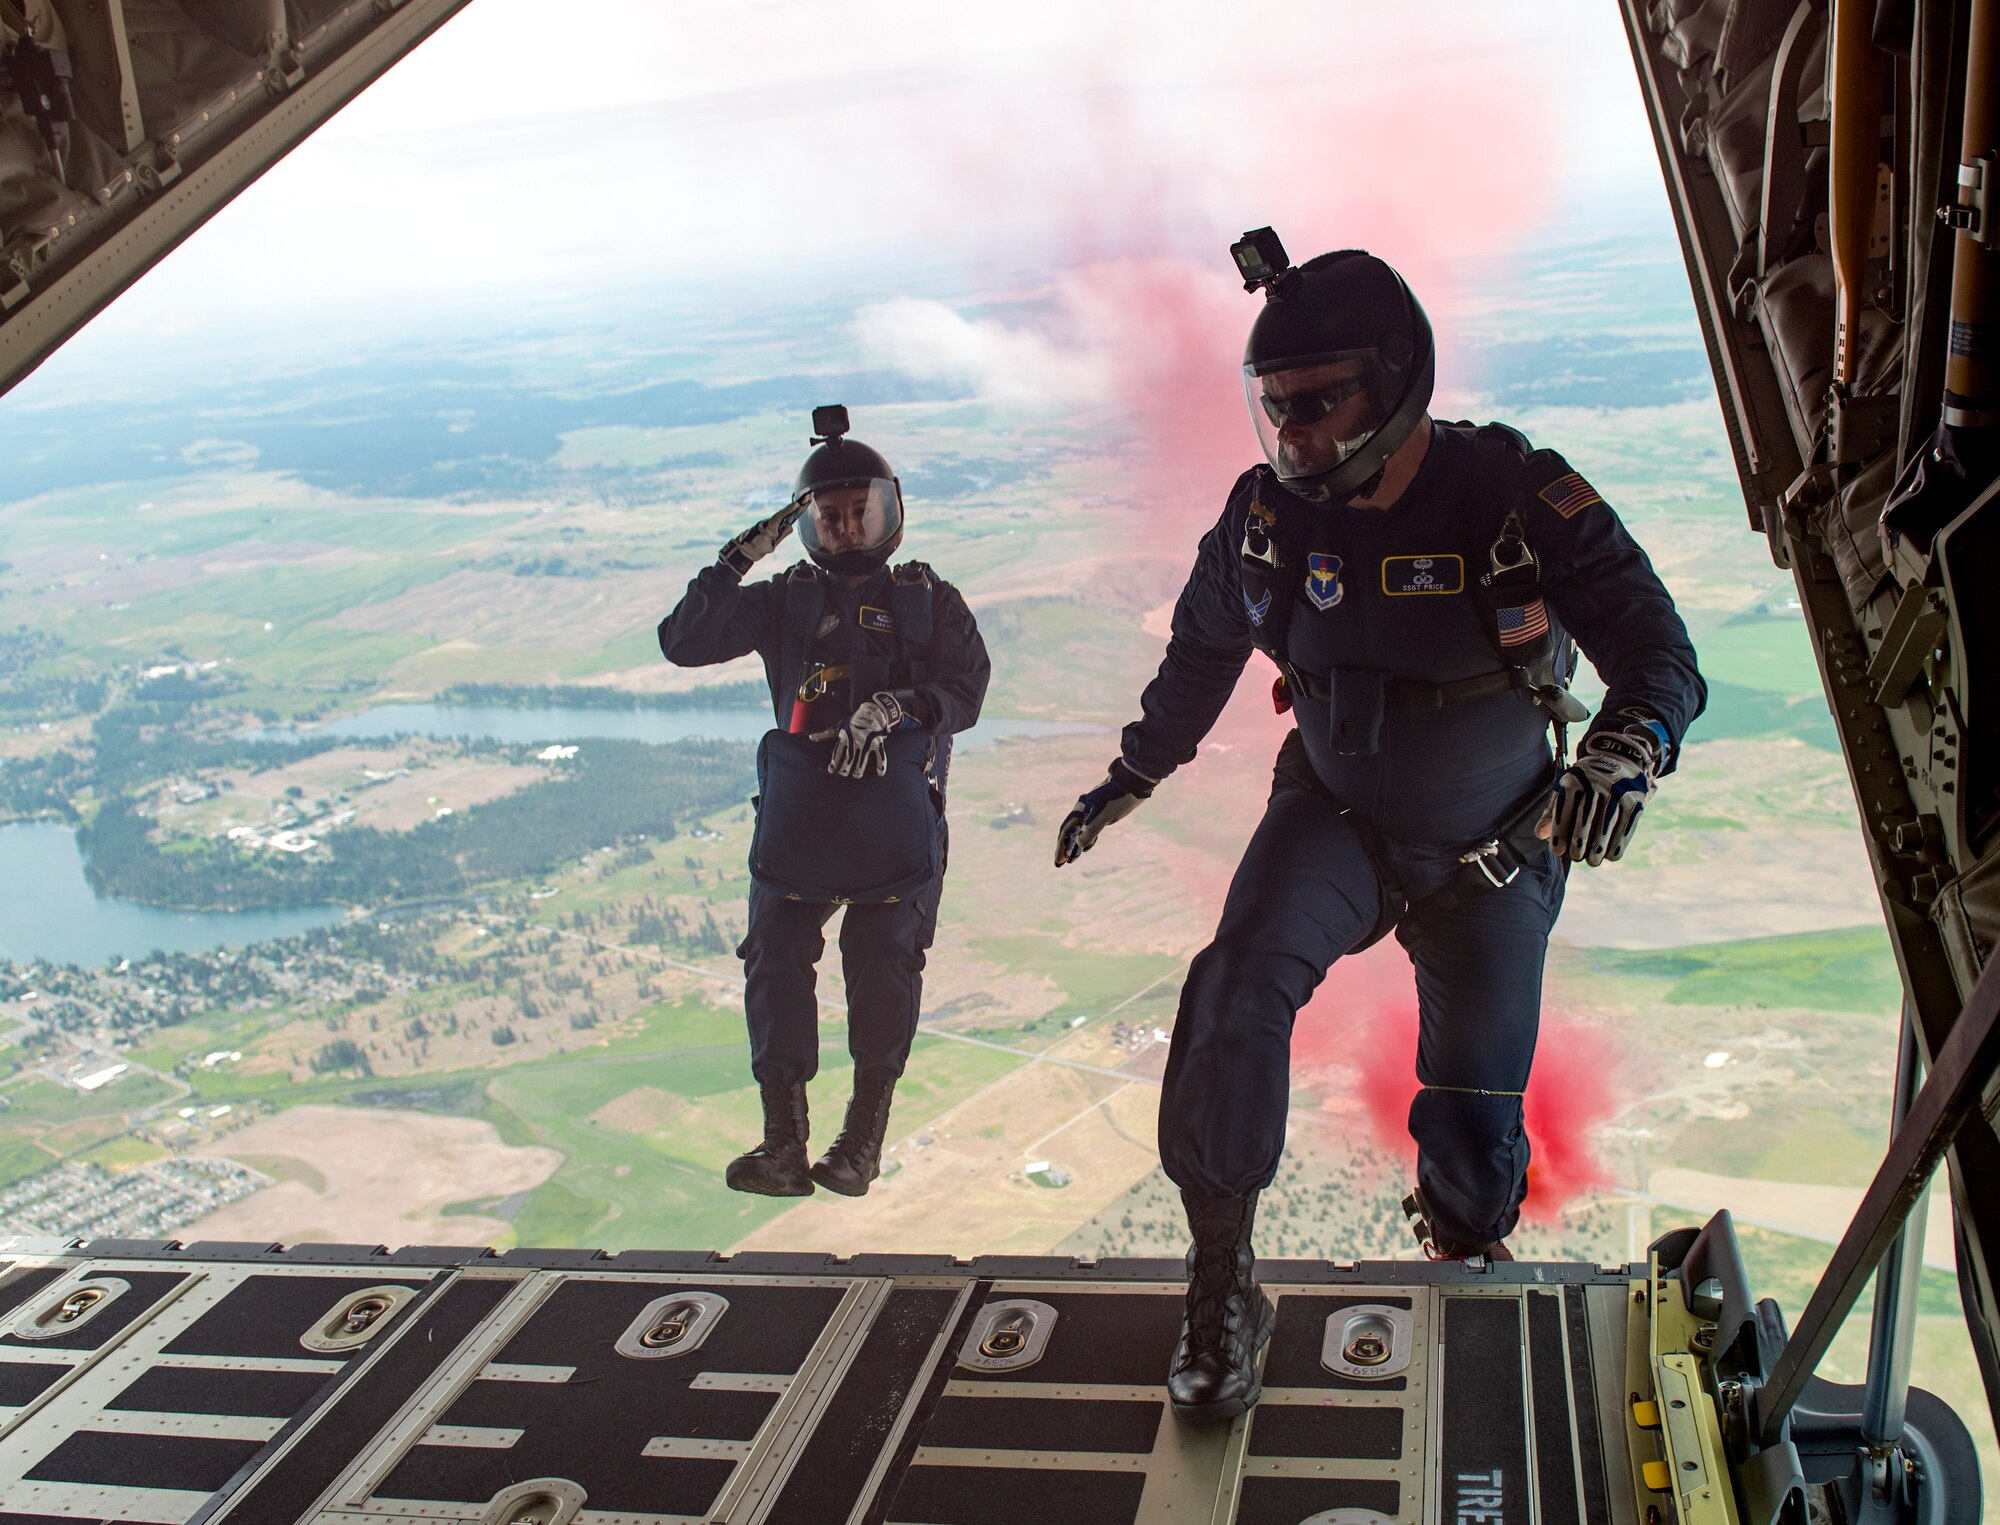 U.S. Air Force Academy cadet Sara Hill and Staff Sgt. Billy Price, Wings of Blue parajumpers, back off of the C-130 Hercules ramp from 4,500 feet during the 2019 Skyfest Open House and Airshow performance at Fairchild Air Force Base, Washington, June 22, 2019. Fairchild opened its gates to the public for a free one-day event to showcase Pacific Northwest airpower and U.S. Air Force capabilities. The airshow included the F-22 Demonstration Team, U.S. Army Golden Knights and 11 other aerial acts. (U.S. Air Force photo by Airman 1st Class Whitney Laine)